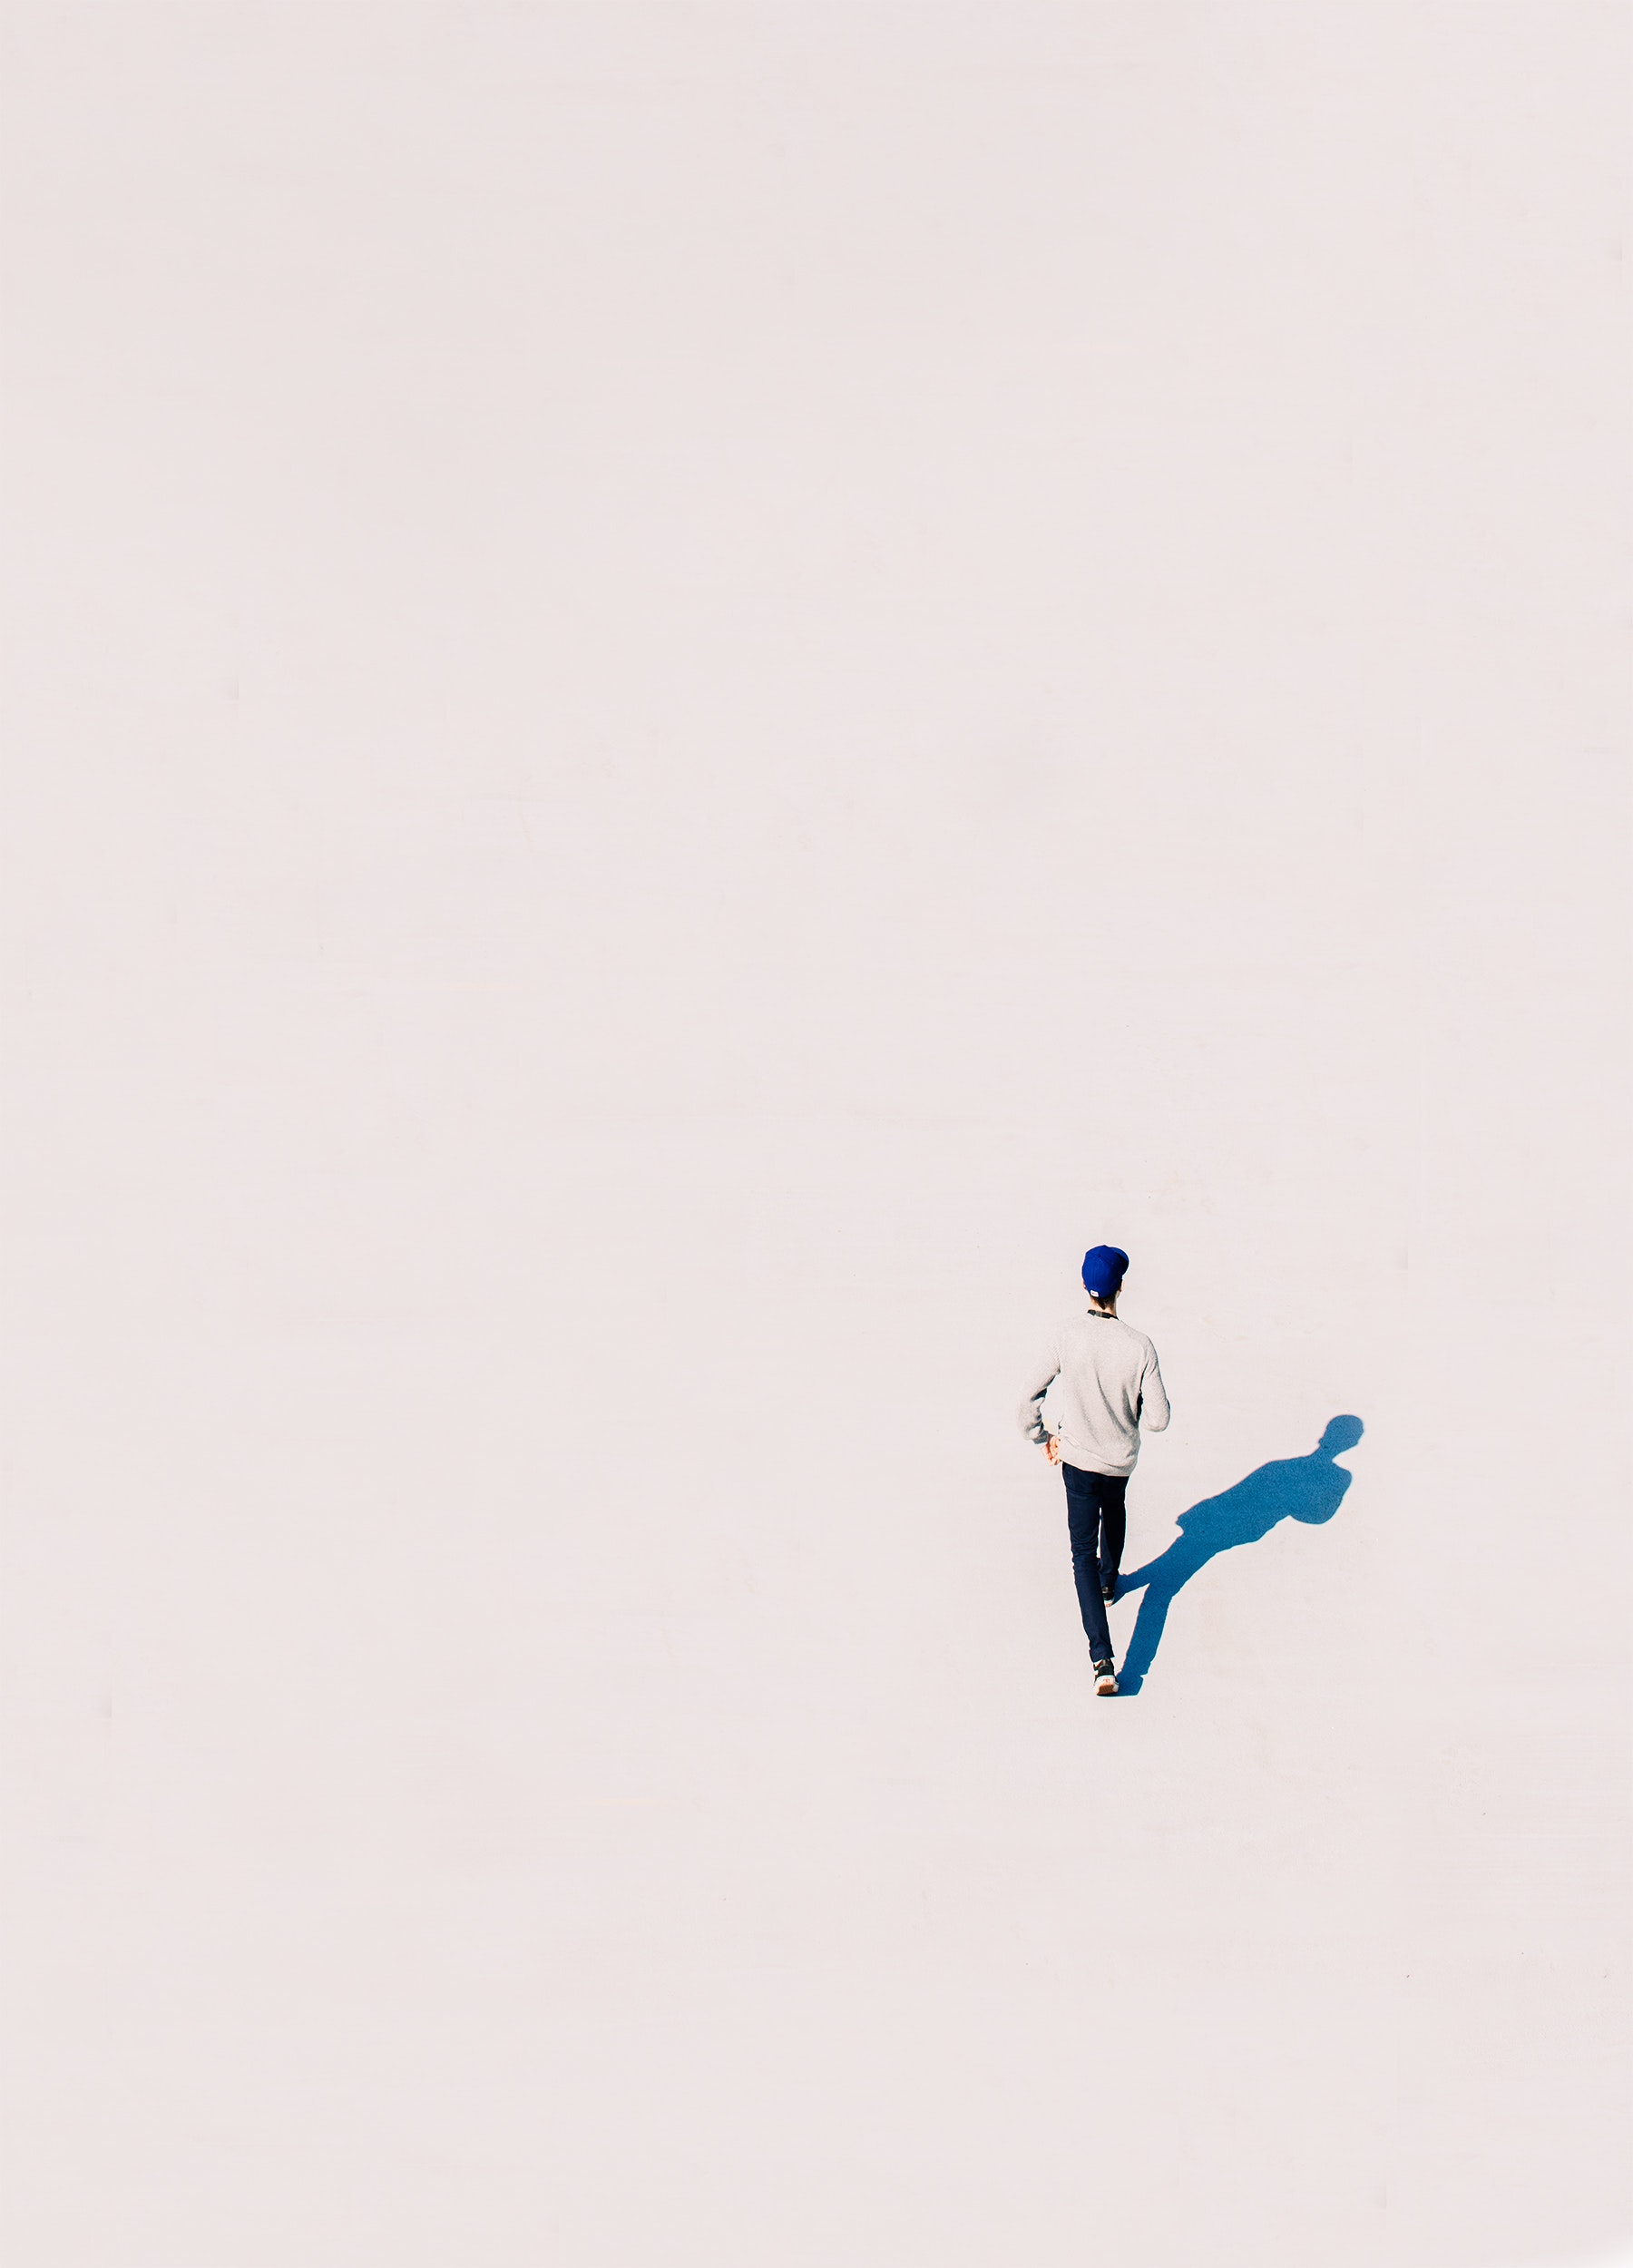 person walking on white background with shadow